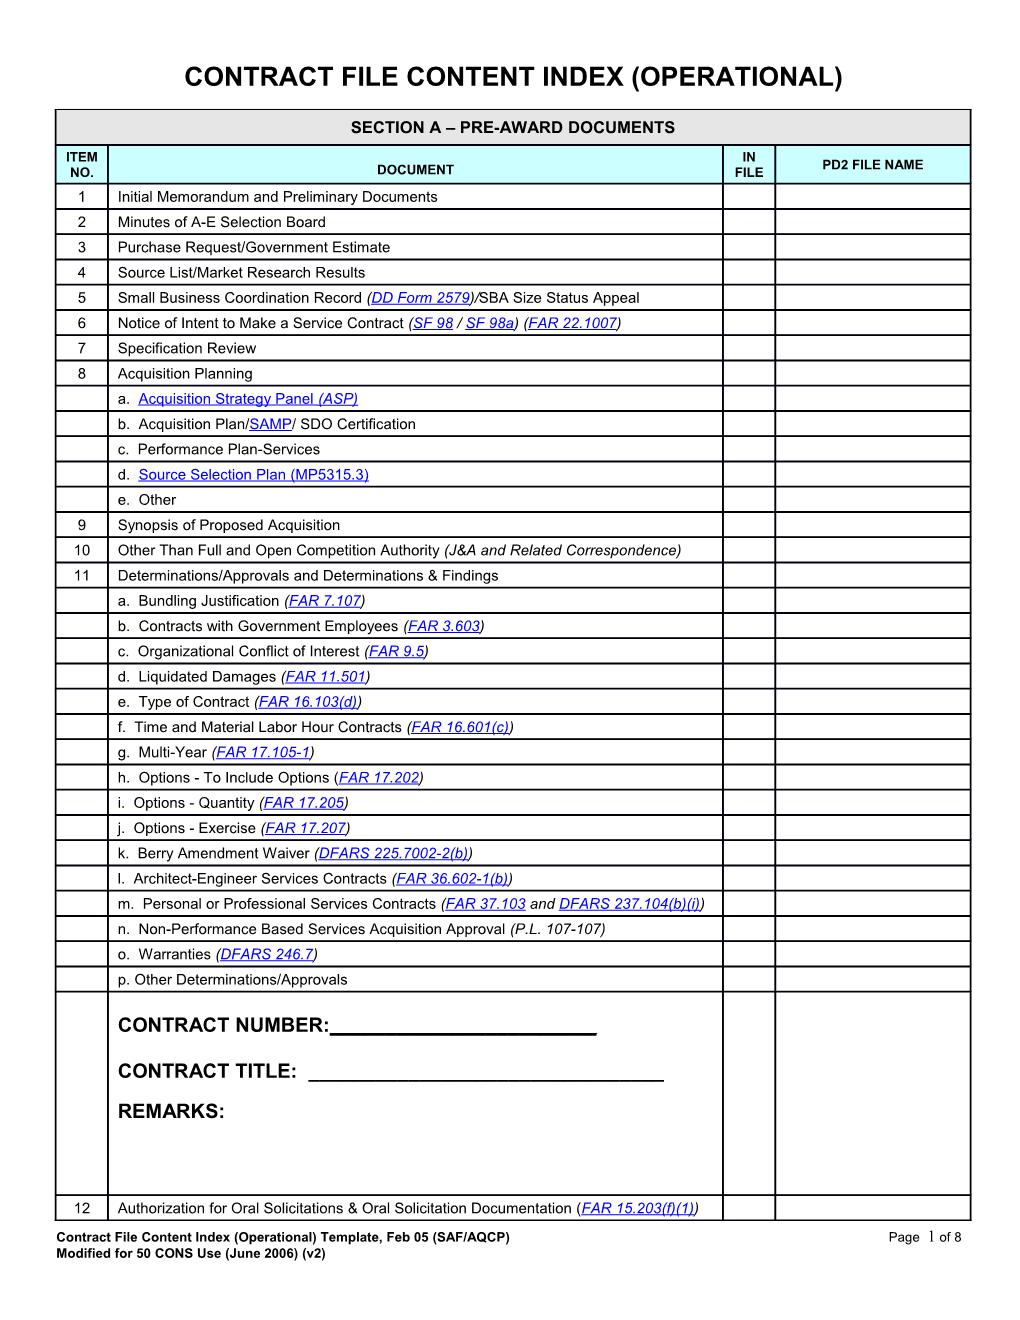 Afmc Contract Folder Index Section a Pre-Award Documents